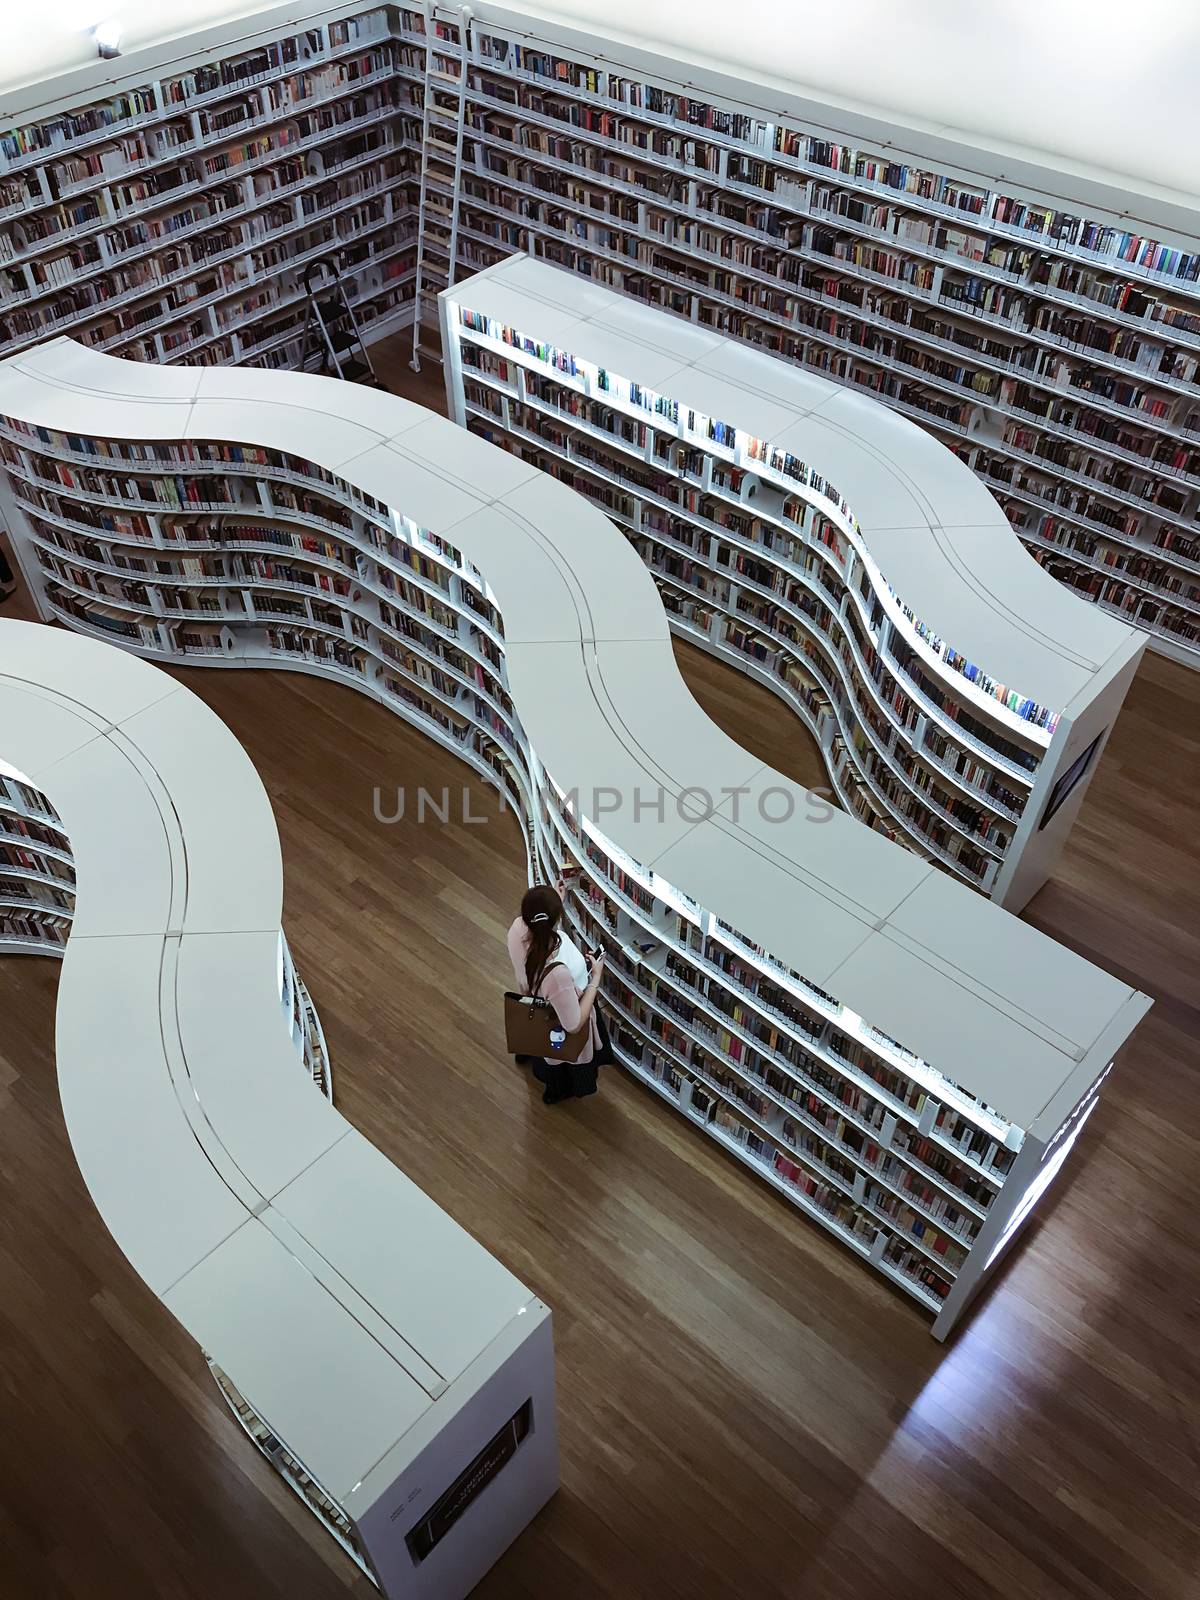 Modern looking layout in Library at Orchard. The place is next generation library with cozy and quiet ambiance located at Orchard Gateway near Somerset MRT Station in Singapore